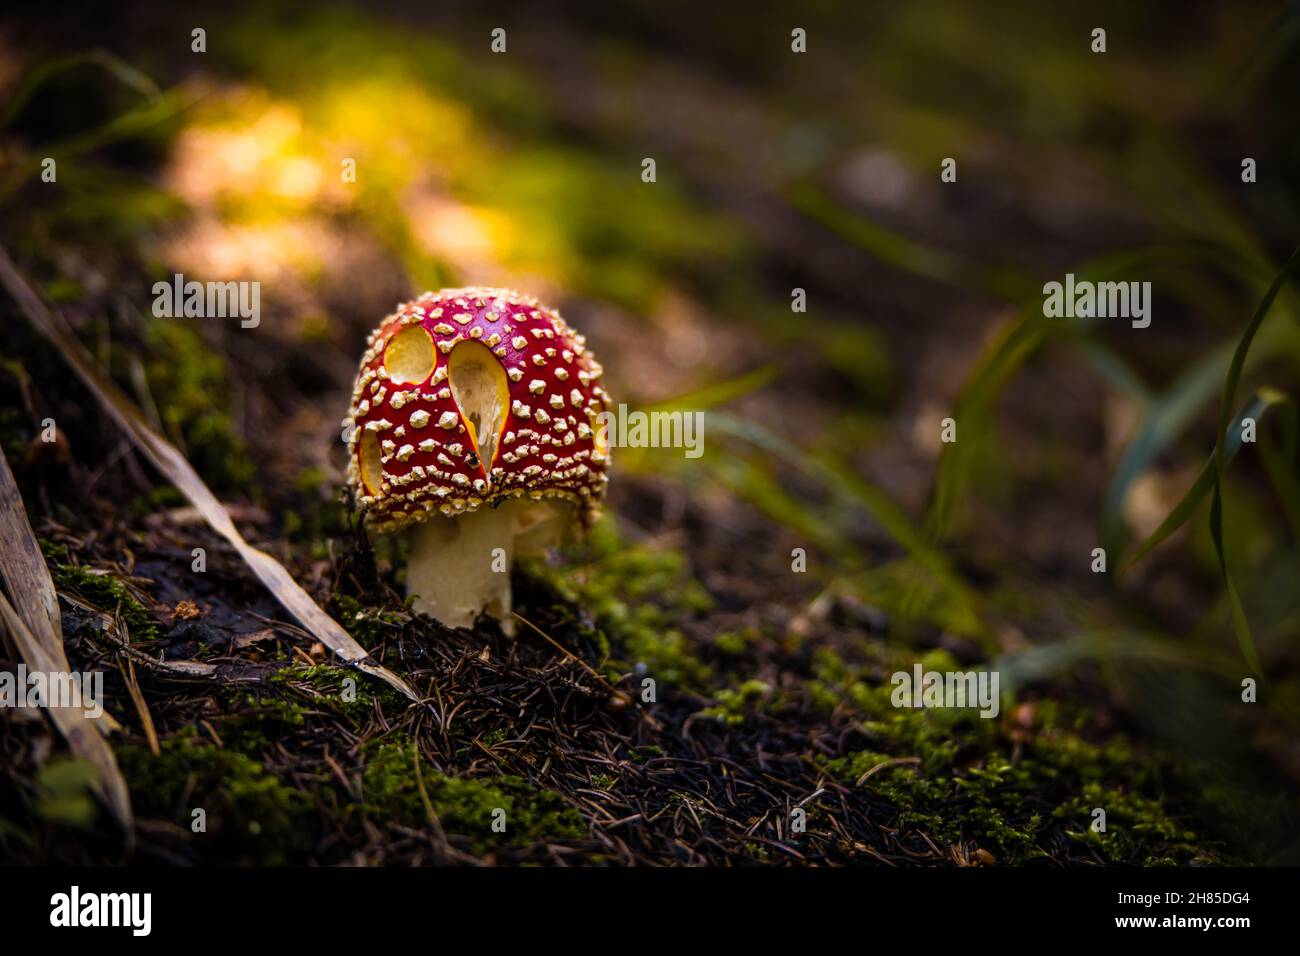 Amanita muscaria. Red spotted mushroom fungi. Fly agaric. Beautiful nature landscape. Green moss, blurred background. High quality photo Stock Photo